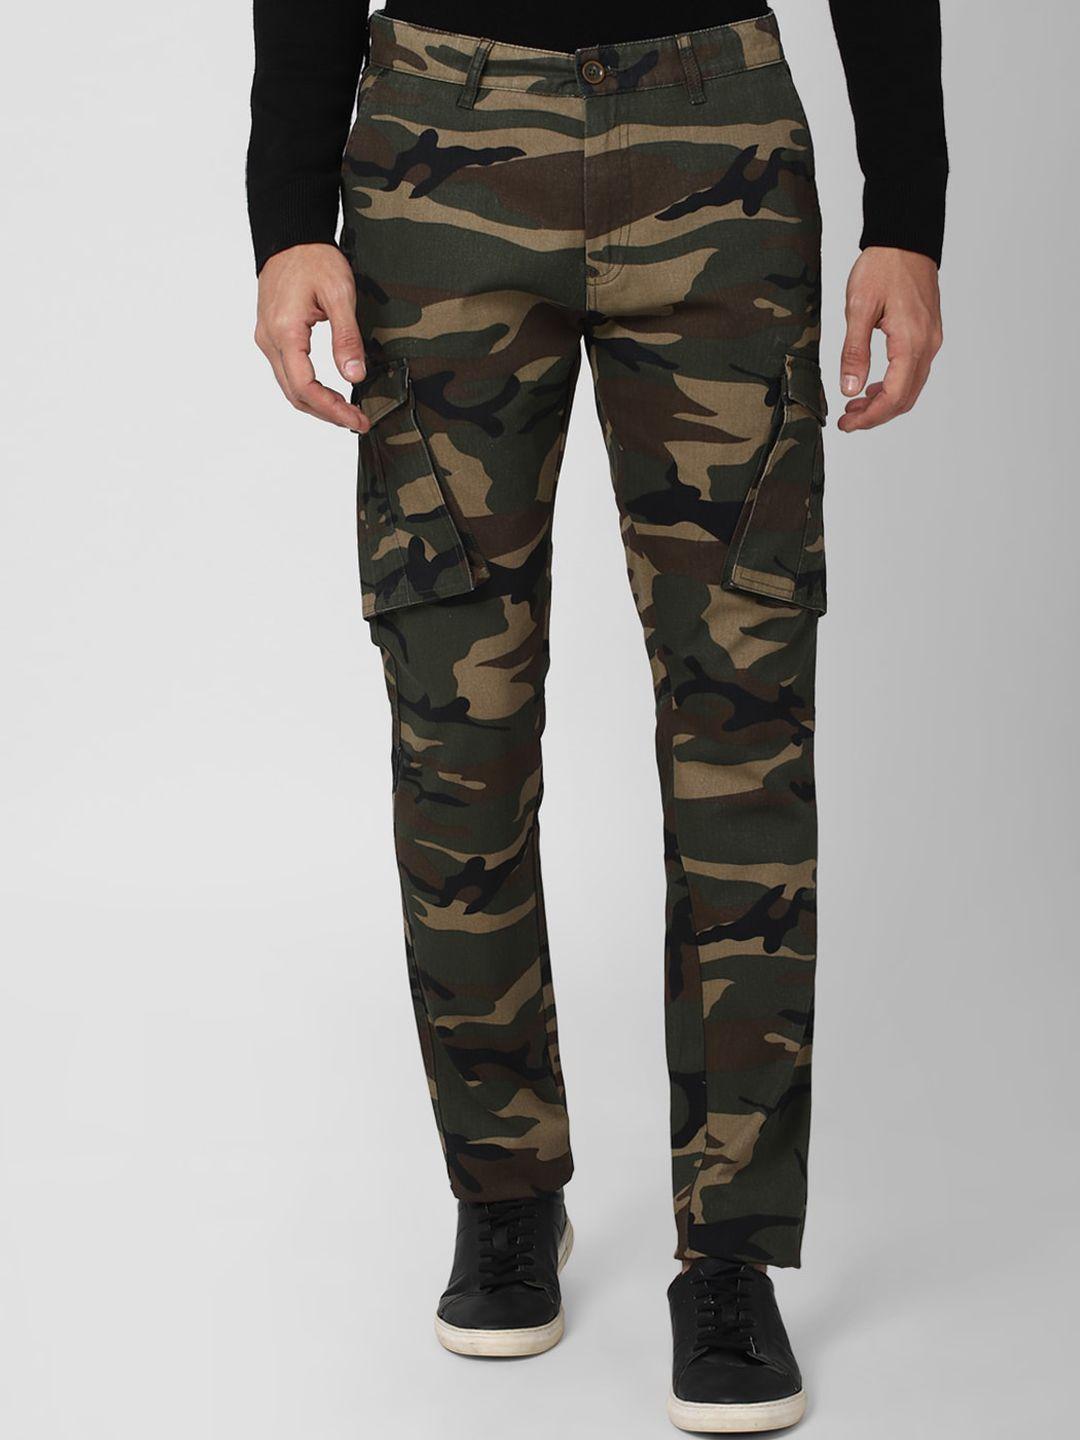 peter-england-casuals-men-olive-green-camouflage-printed-pure-cotton-cargos-trousers